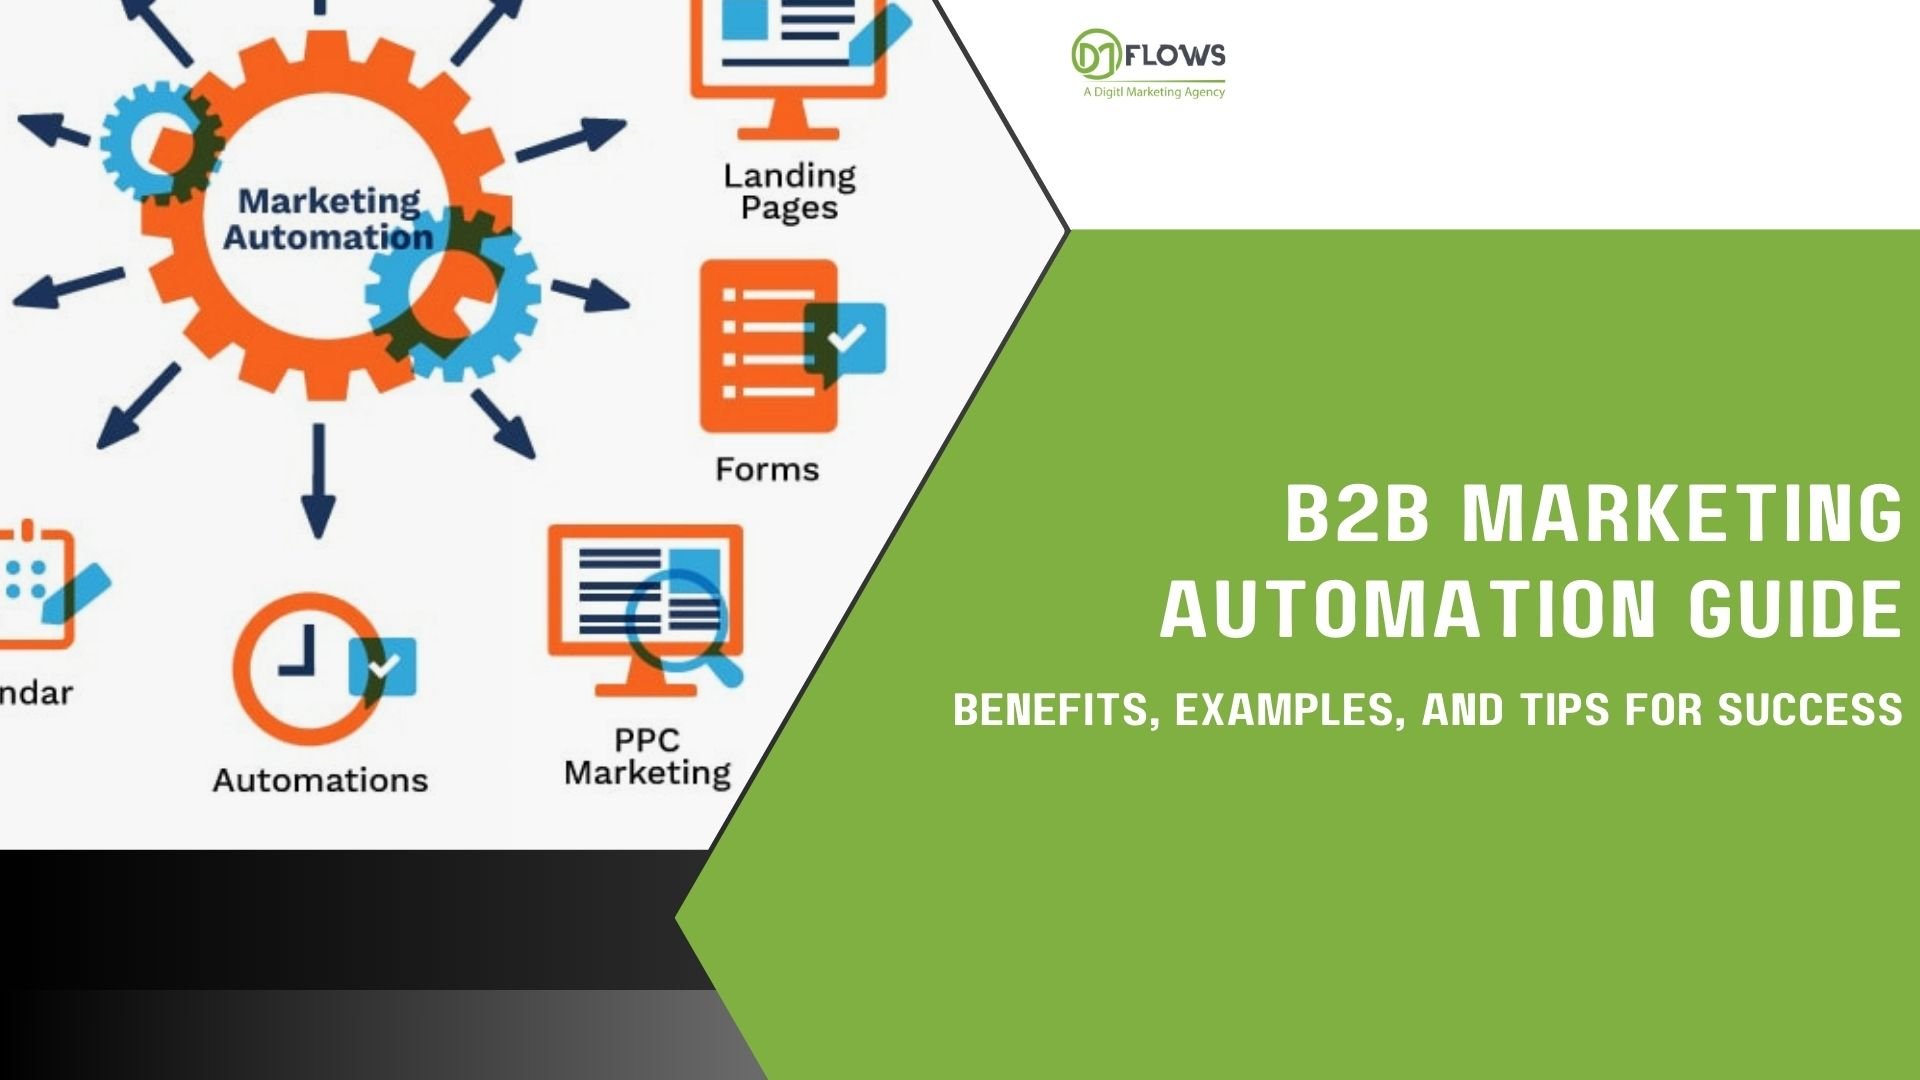 B2B Marketing Automation Guide Benefits, Examples, and Tips for Success